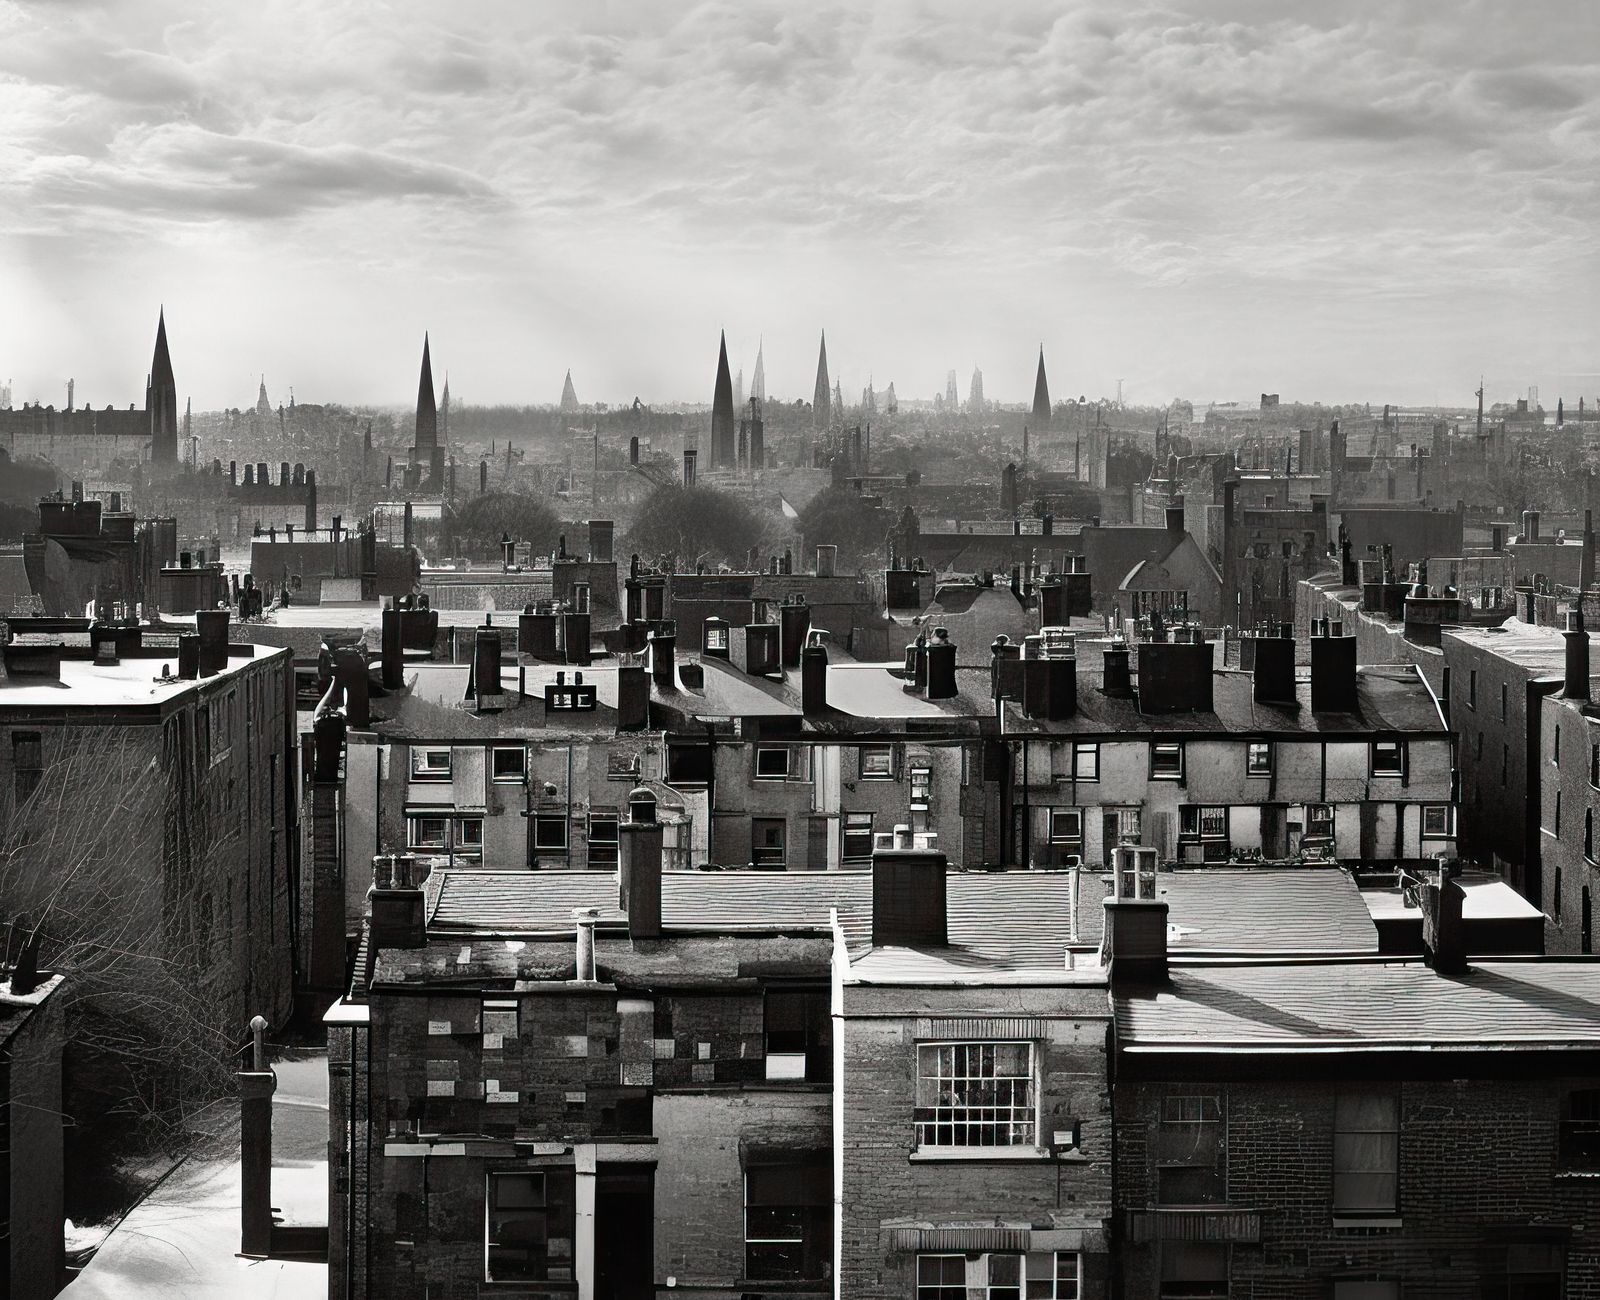 © Craig Ames - View from Harvard residential area, Cambridge. (Possibly After Nicholas Nixon)